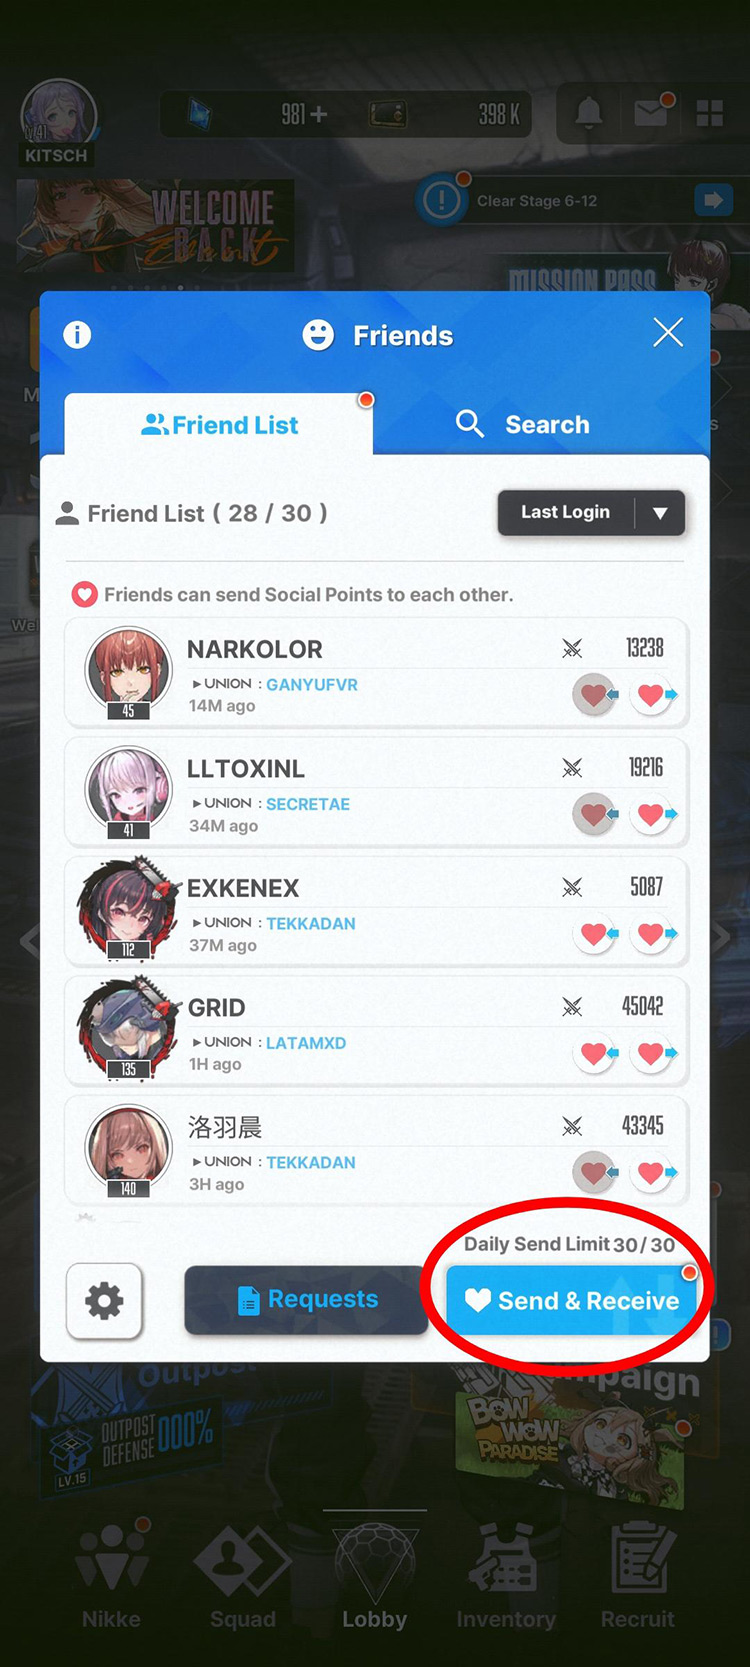 Friend List (“Send & Receive” Button Highlighted) / Nikke: Goddess of Victory